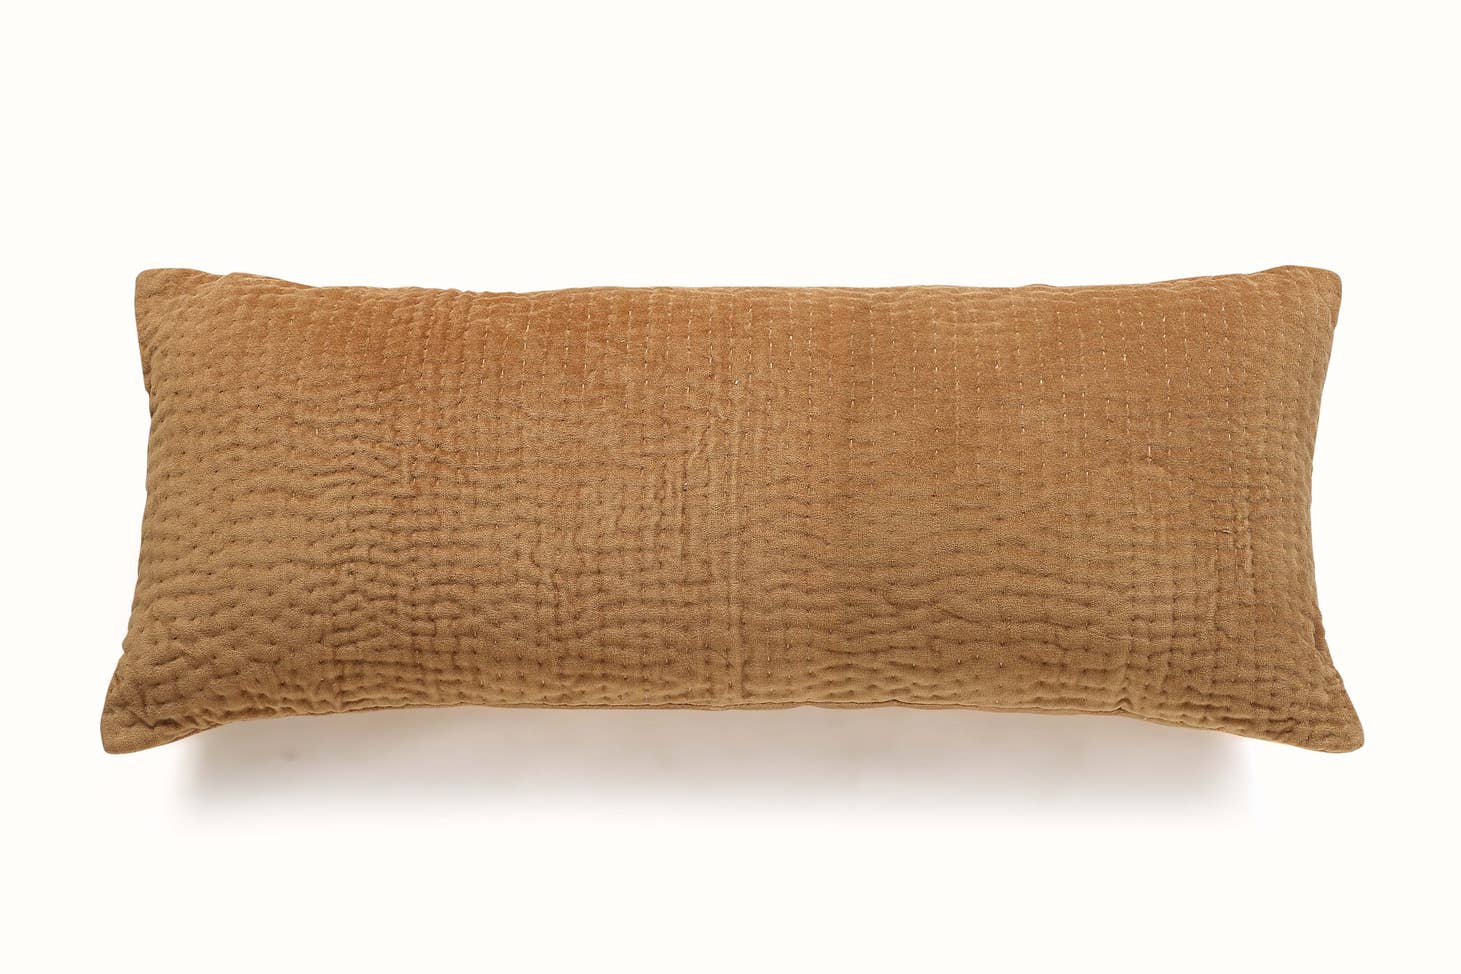 Casa Amarosa Plush Velvet Kantha Lumbar Pillow : Plush velvet meets this lumbar cushion's solid style, which is created using an ancient stitching technique, Kantha.  Ethically made in India.